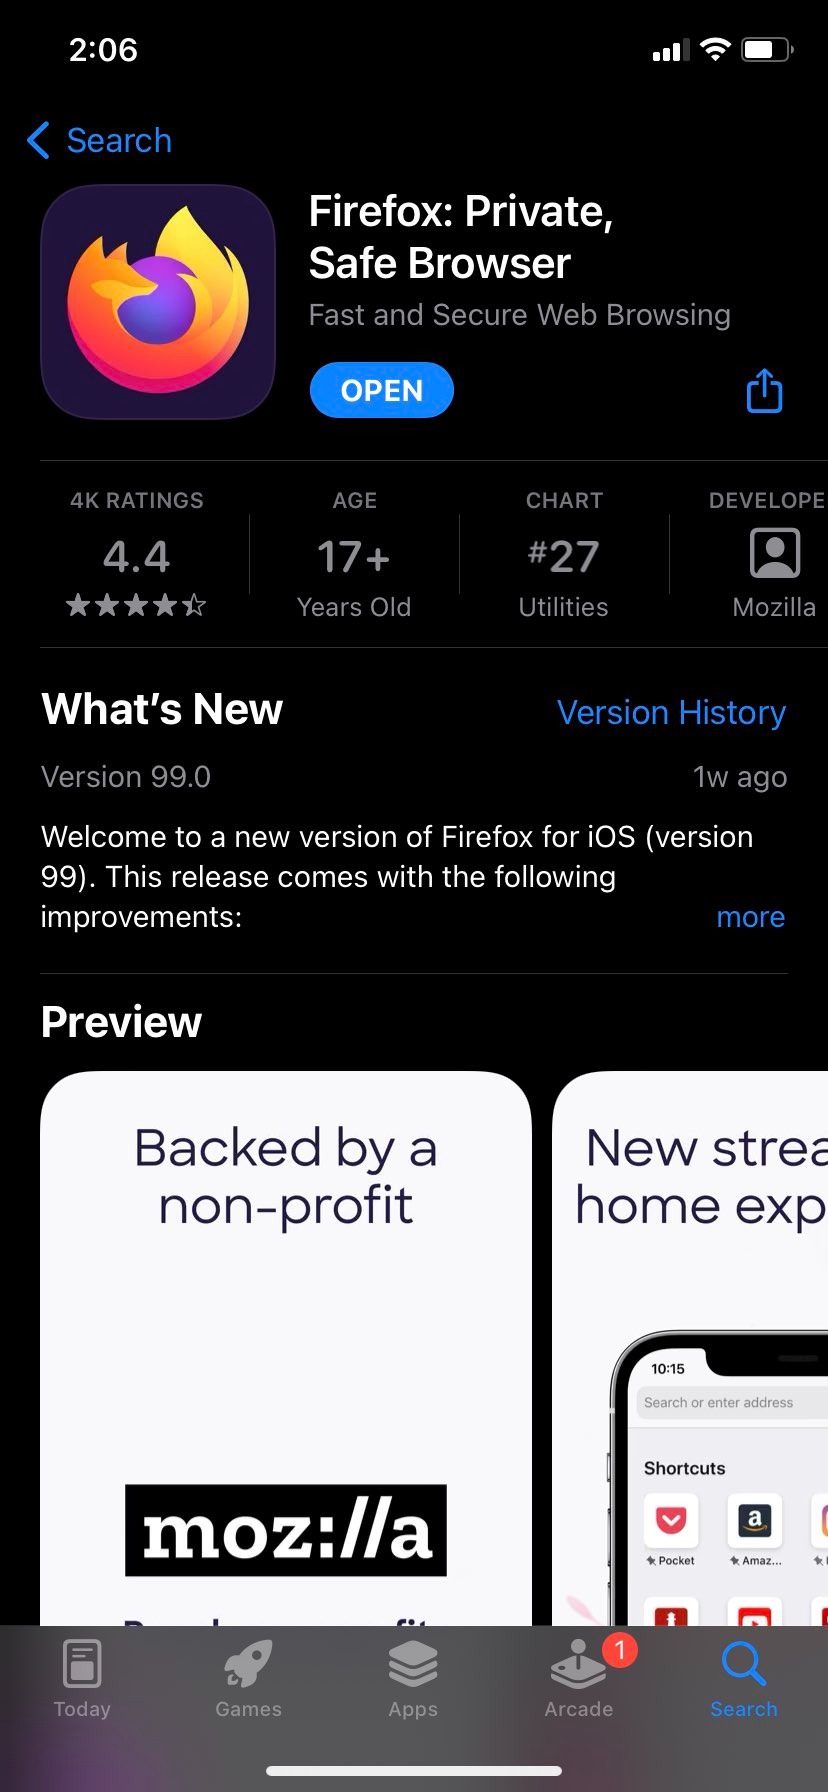 Firefox for iOS in the Apple App Store.